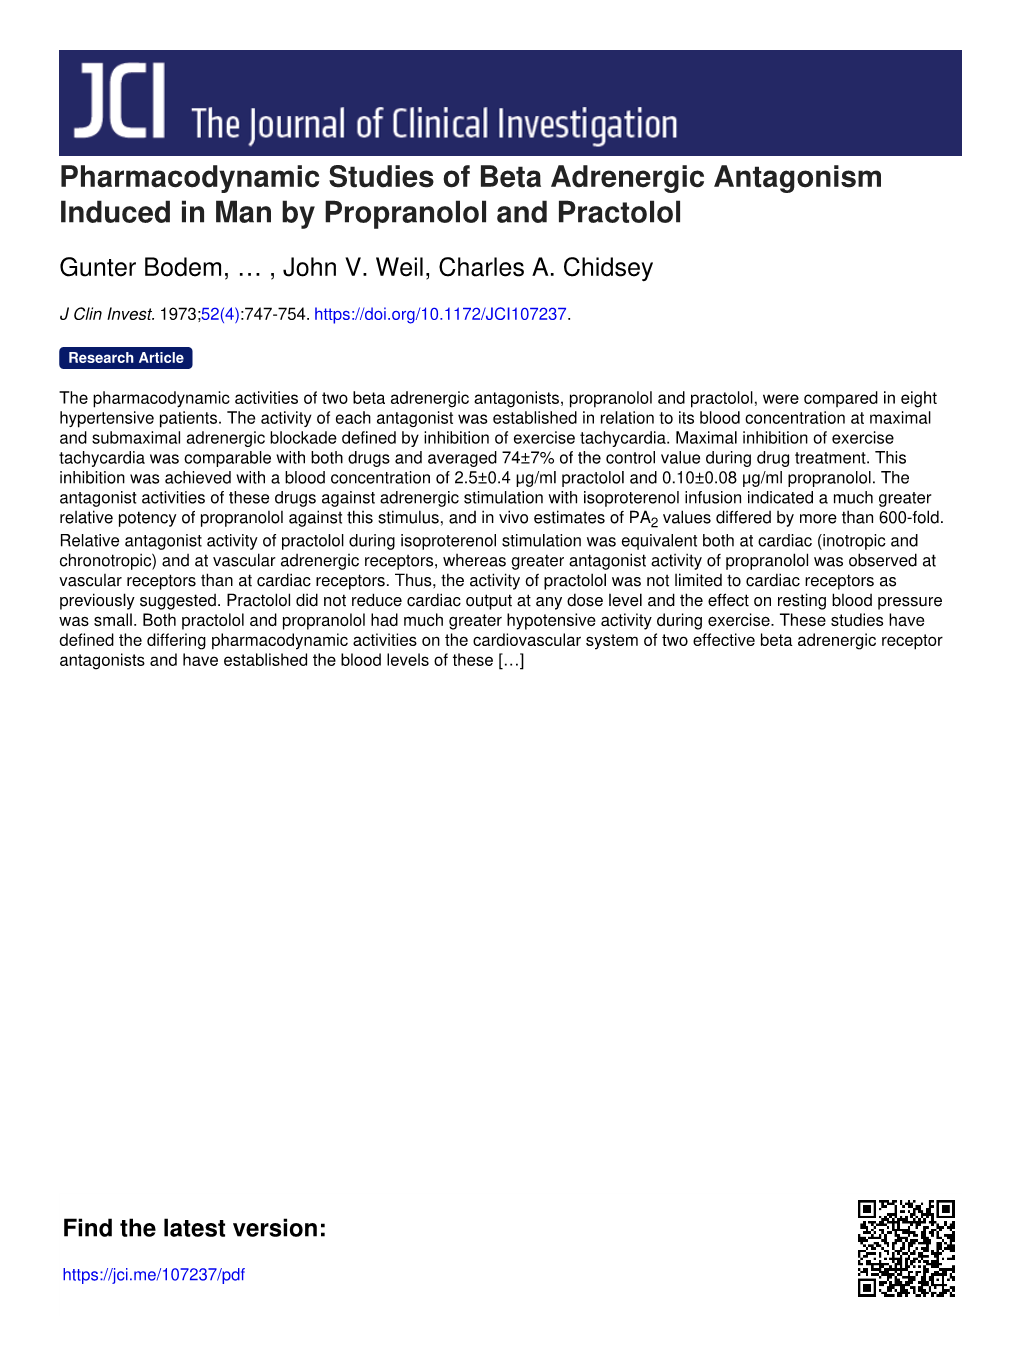 Pharmacodynamic Studies of Beta Adrenergic Antagonism Induced in Man by Propranolol and Practolol